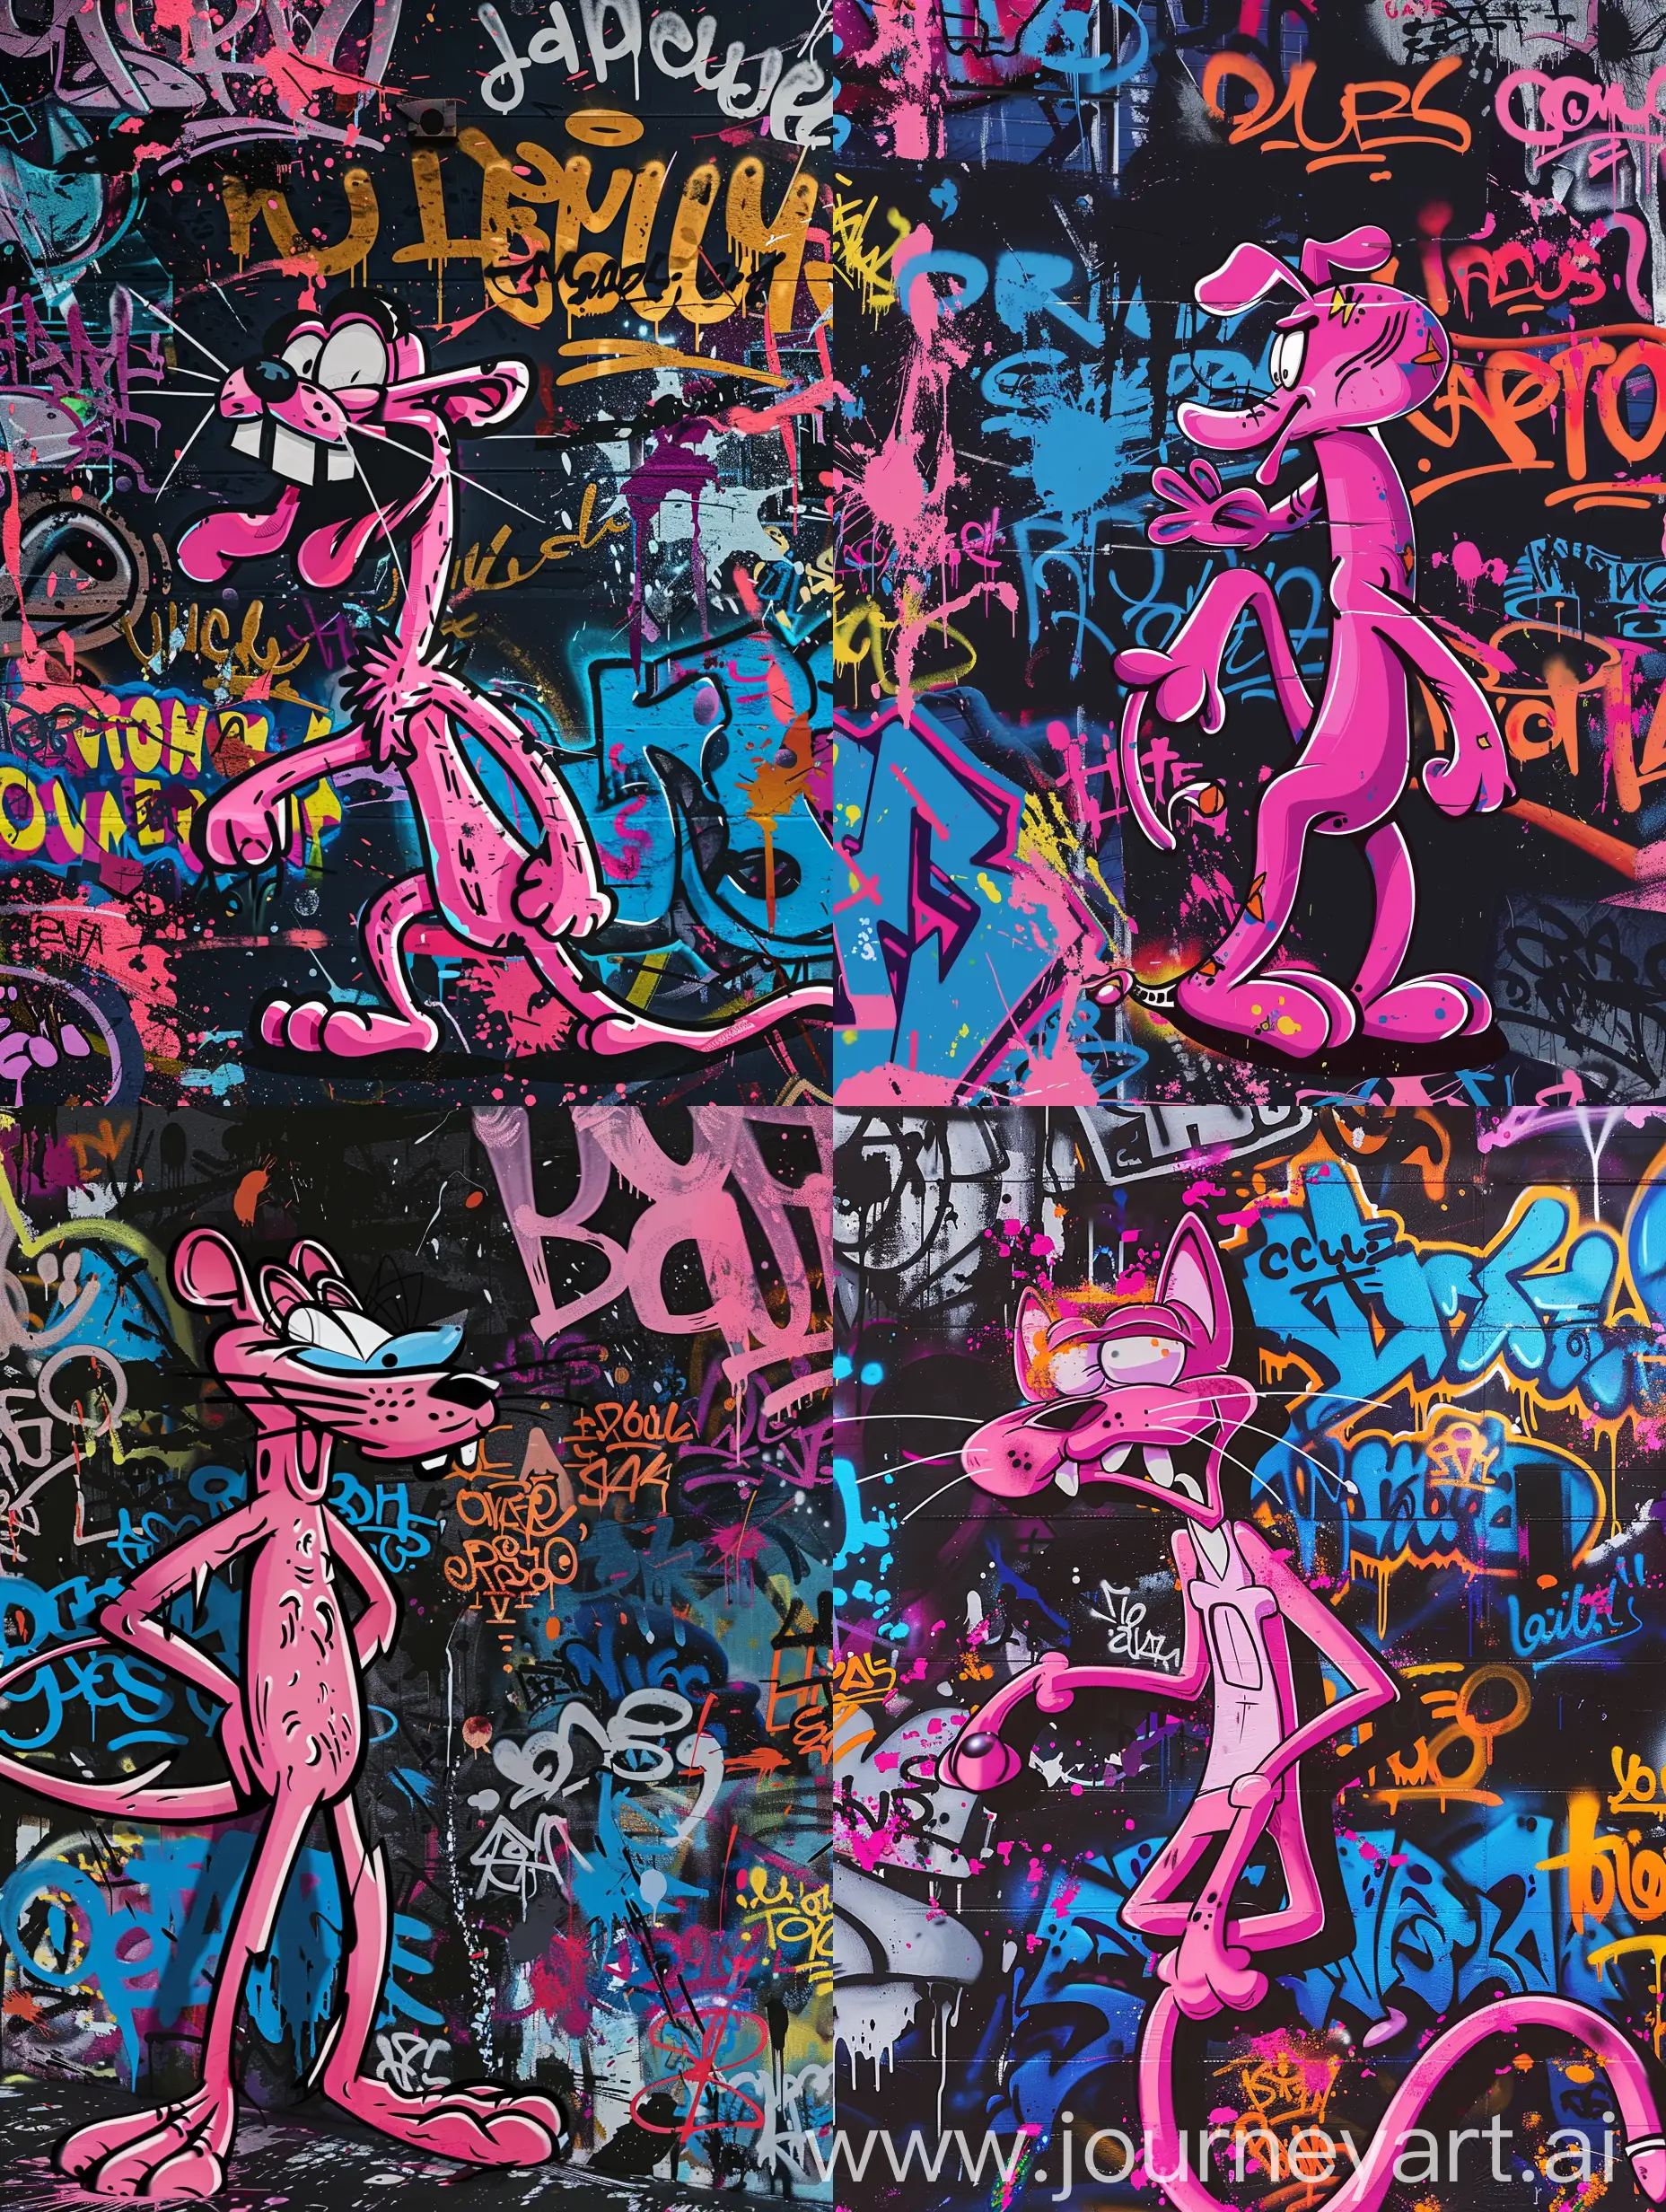 Fantasy-Illustration-of-Jacques-Clouseau-Pink-Panther-Character-in-Urban-Graffiti-Setting